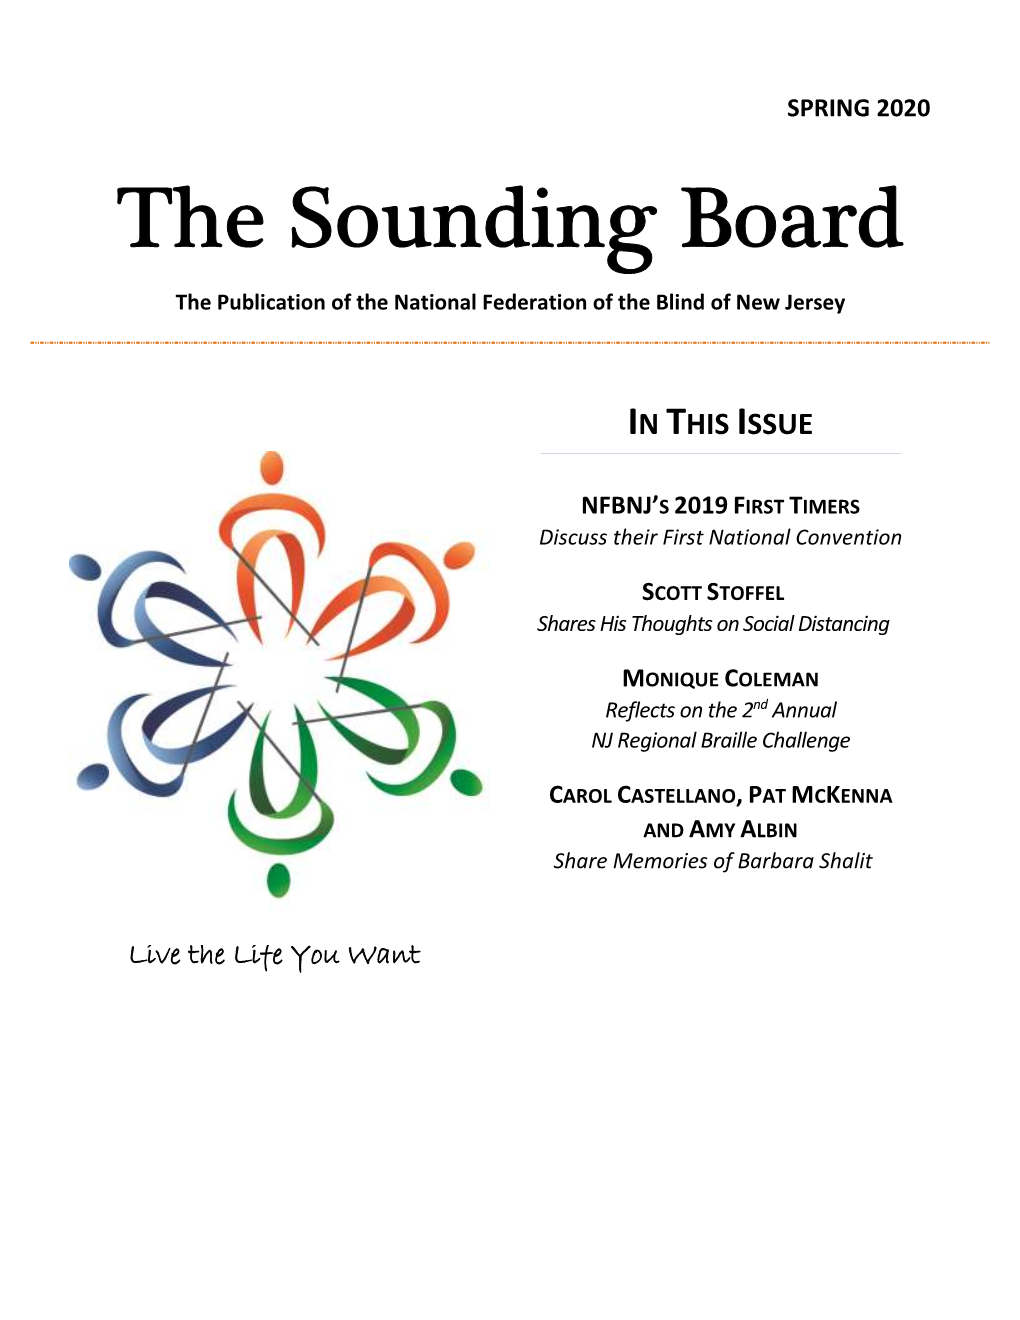 The Sounding Board, Spring 2020